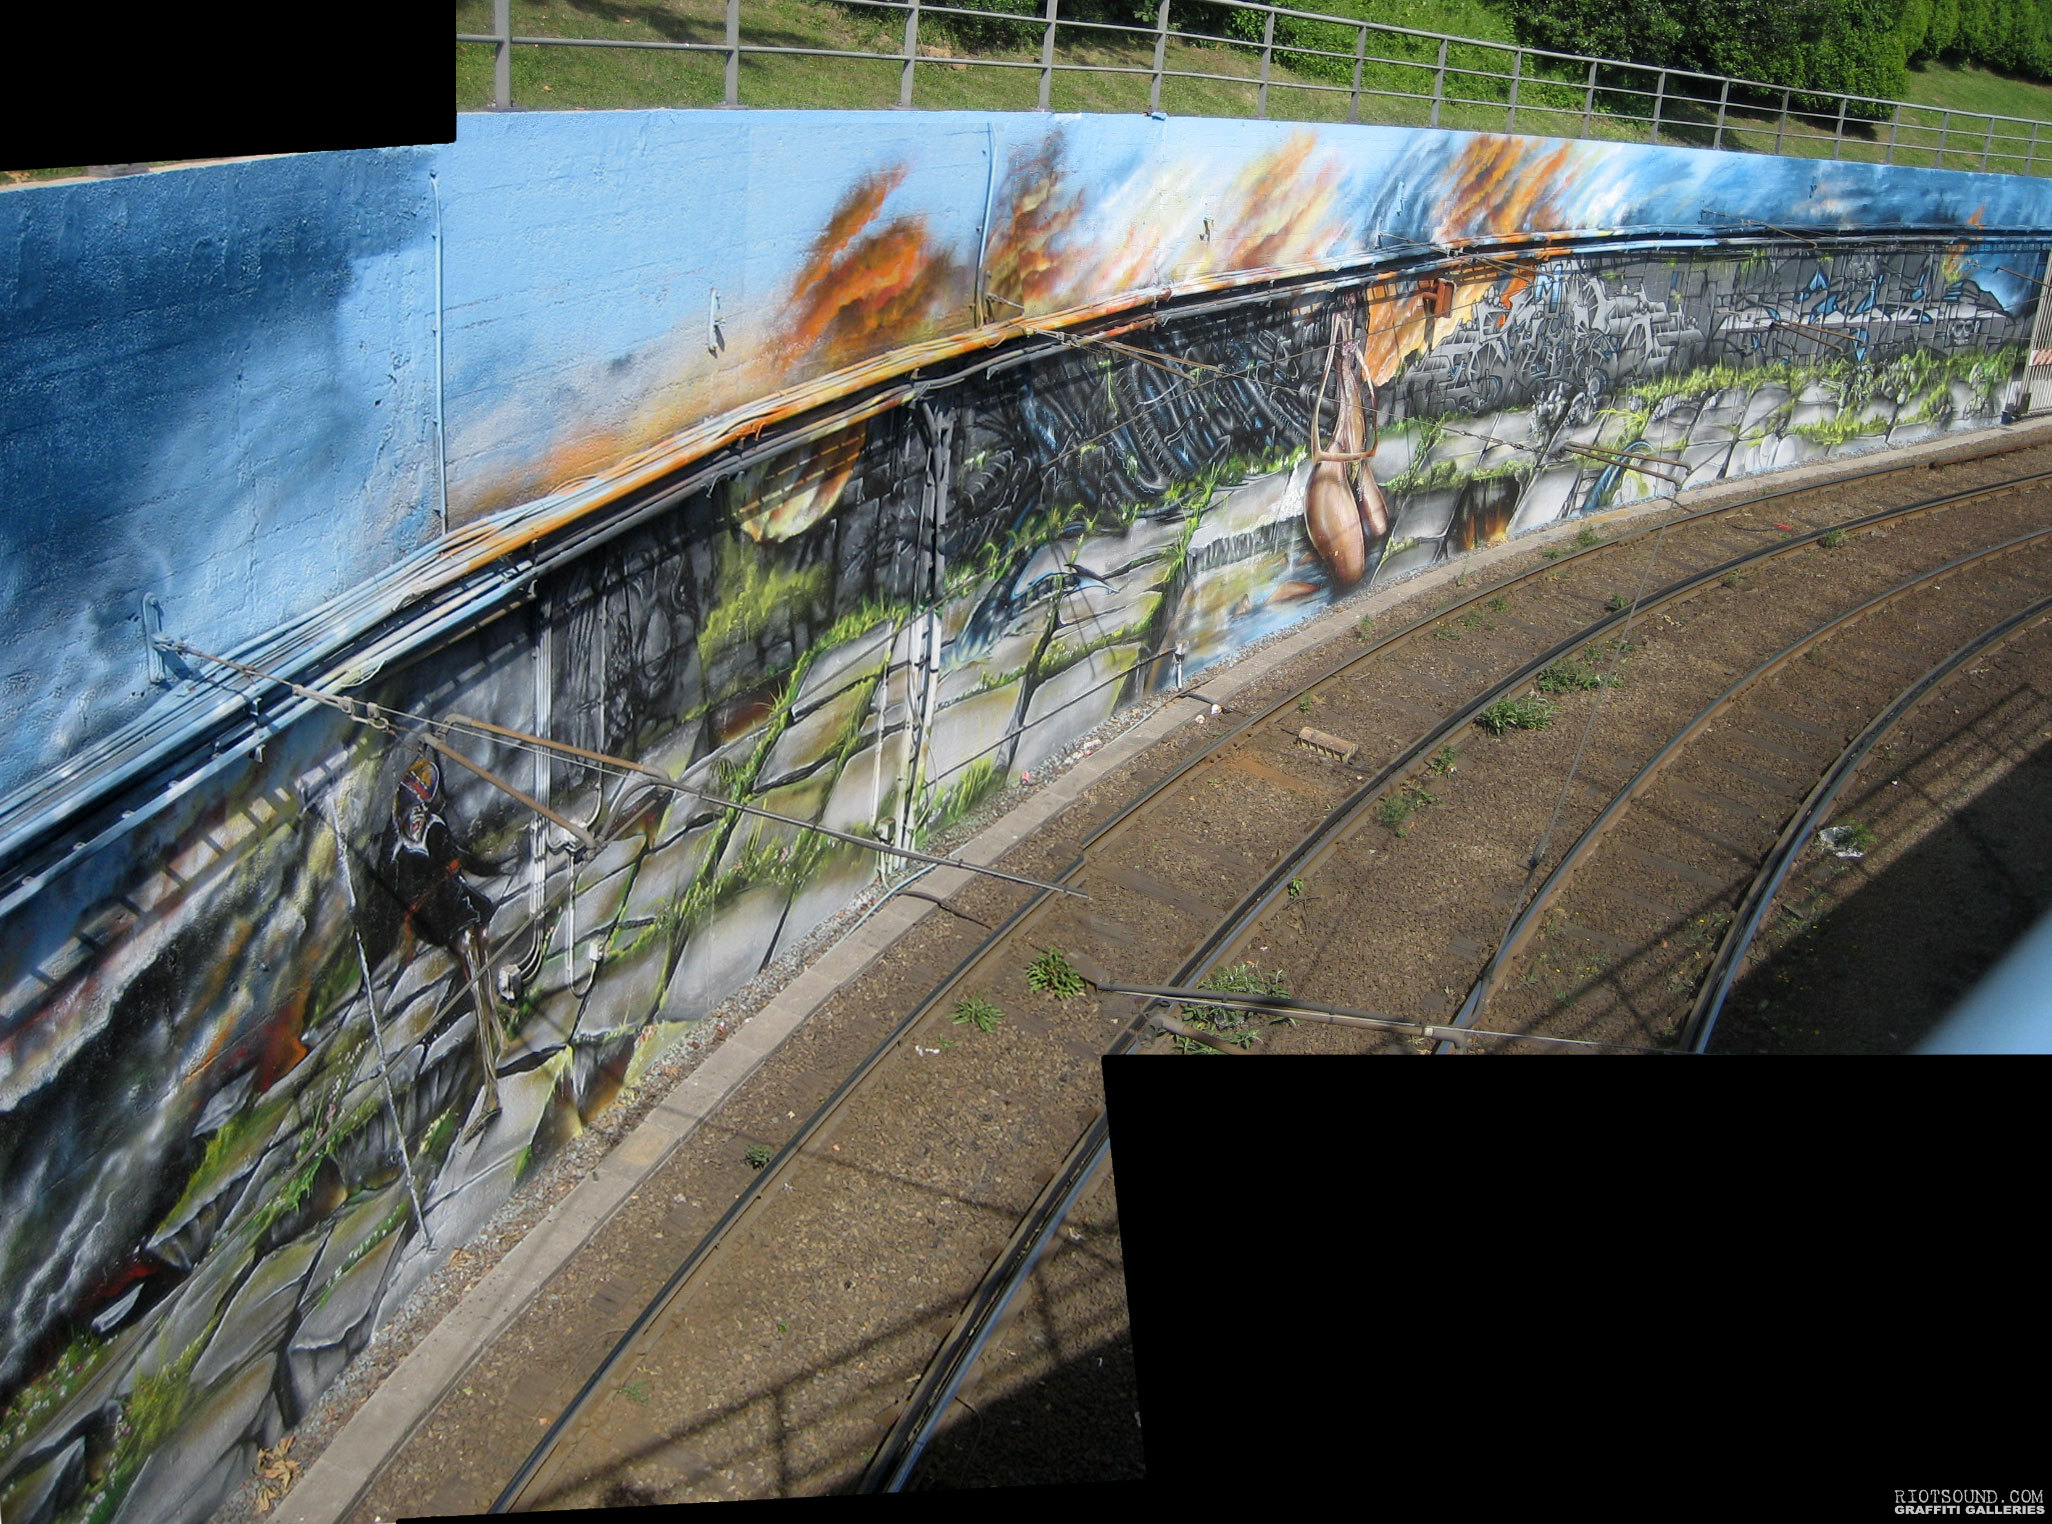 Mural By The Tracks